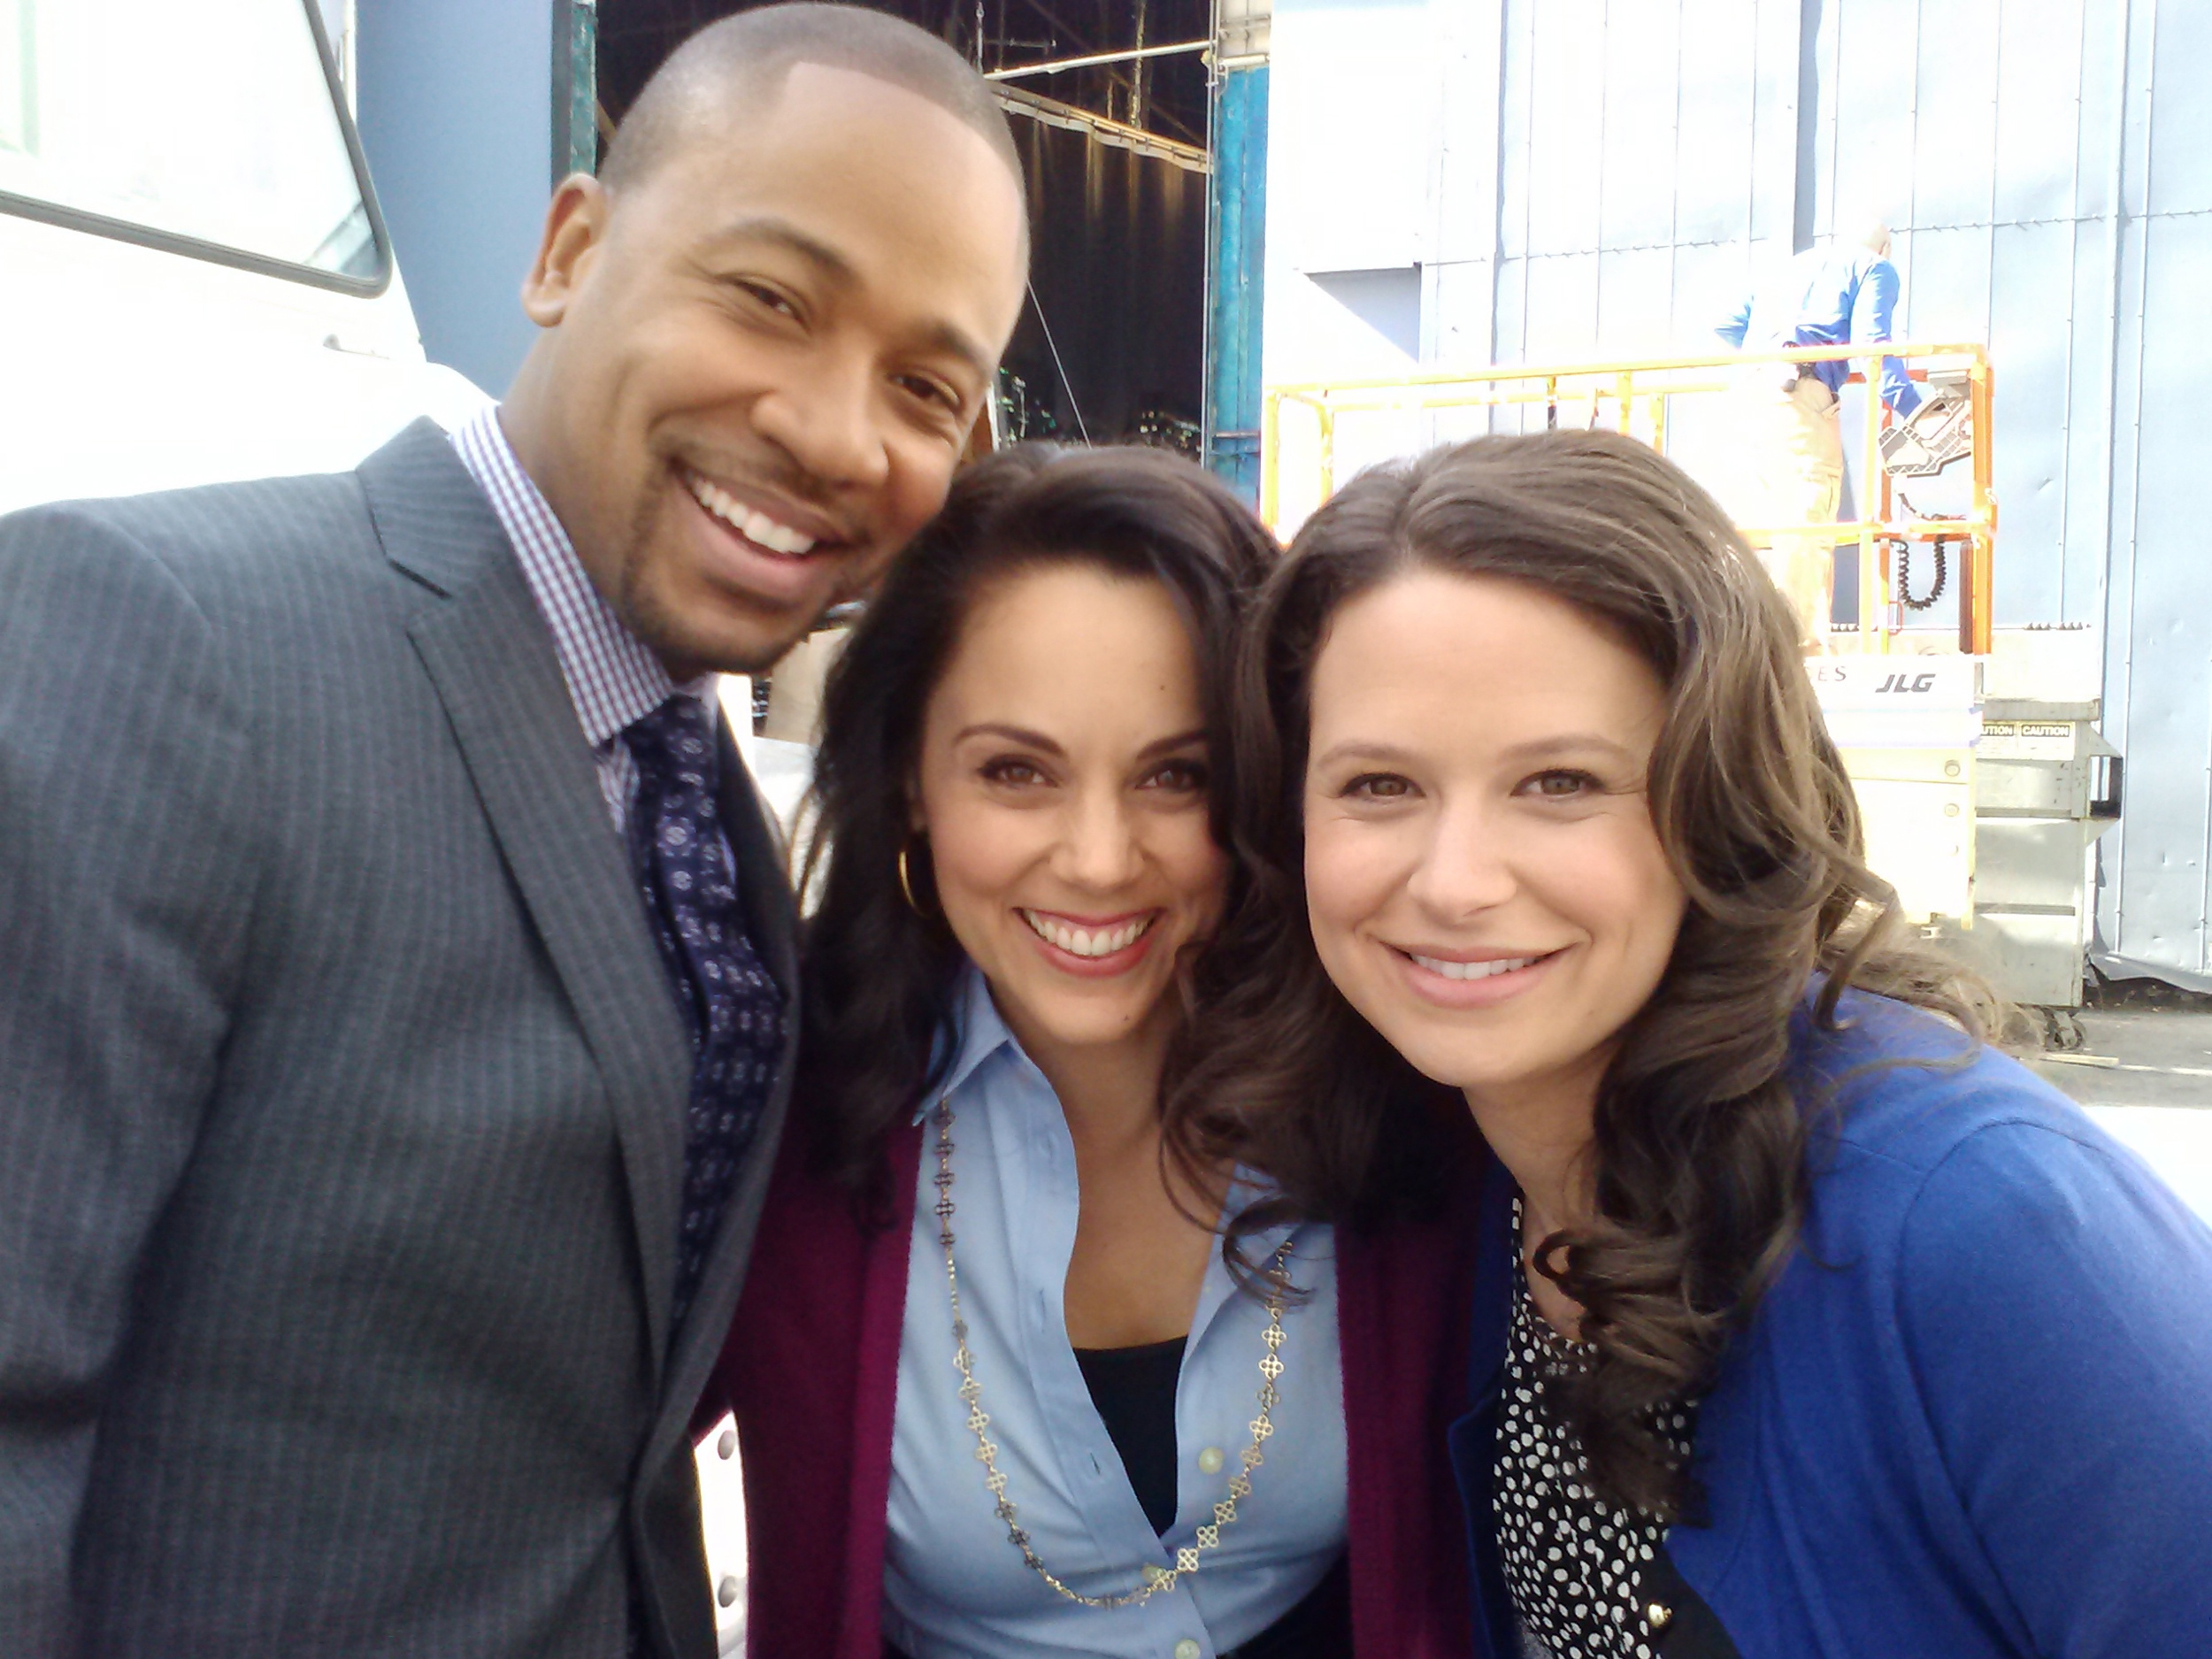 Columbus Short, Tessa Munro and Katie Lowes on the set of ABC's 